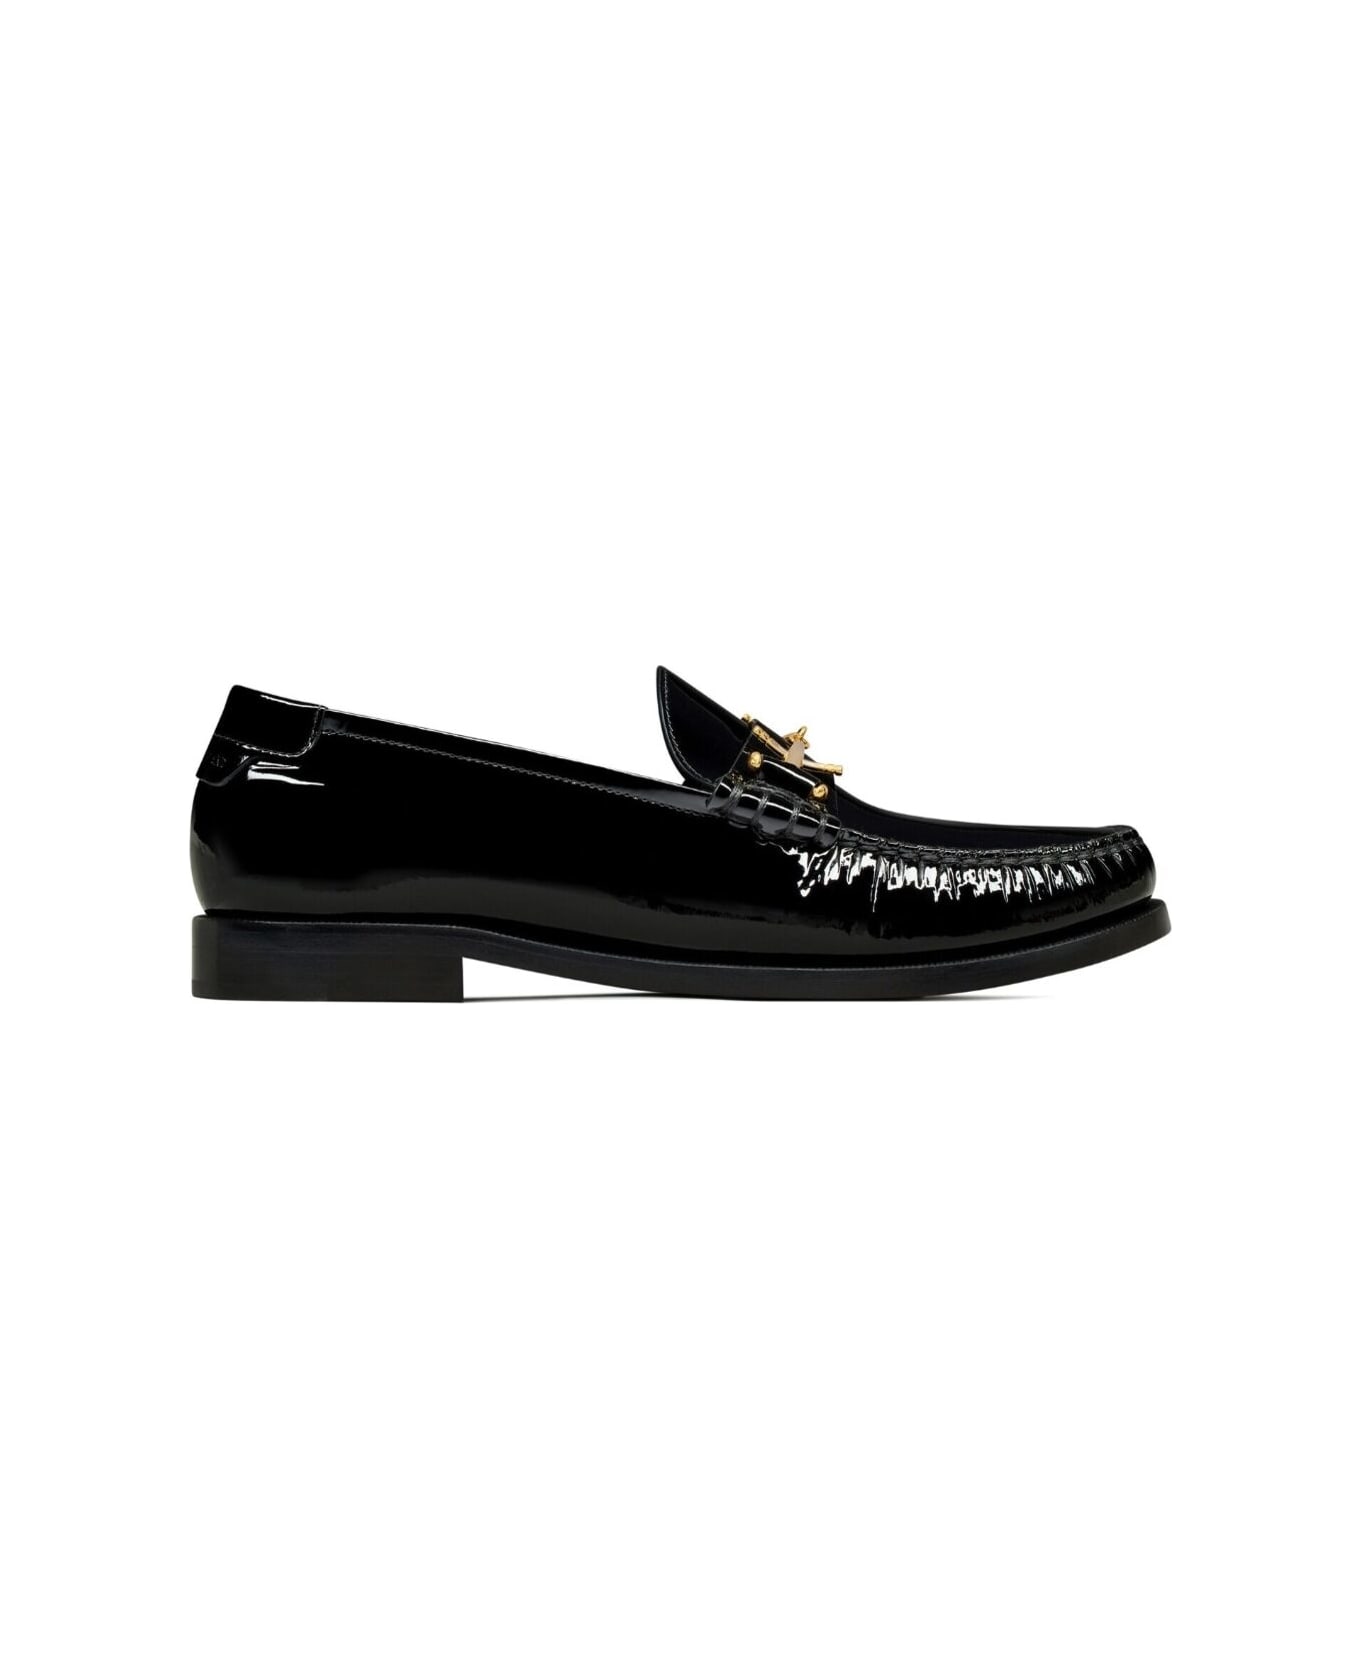 Saint Laurent Le Loafer Penny Slippers In Black Patent Leather Woman - Black フラットシューズ